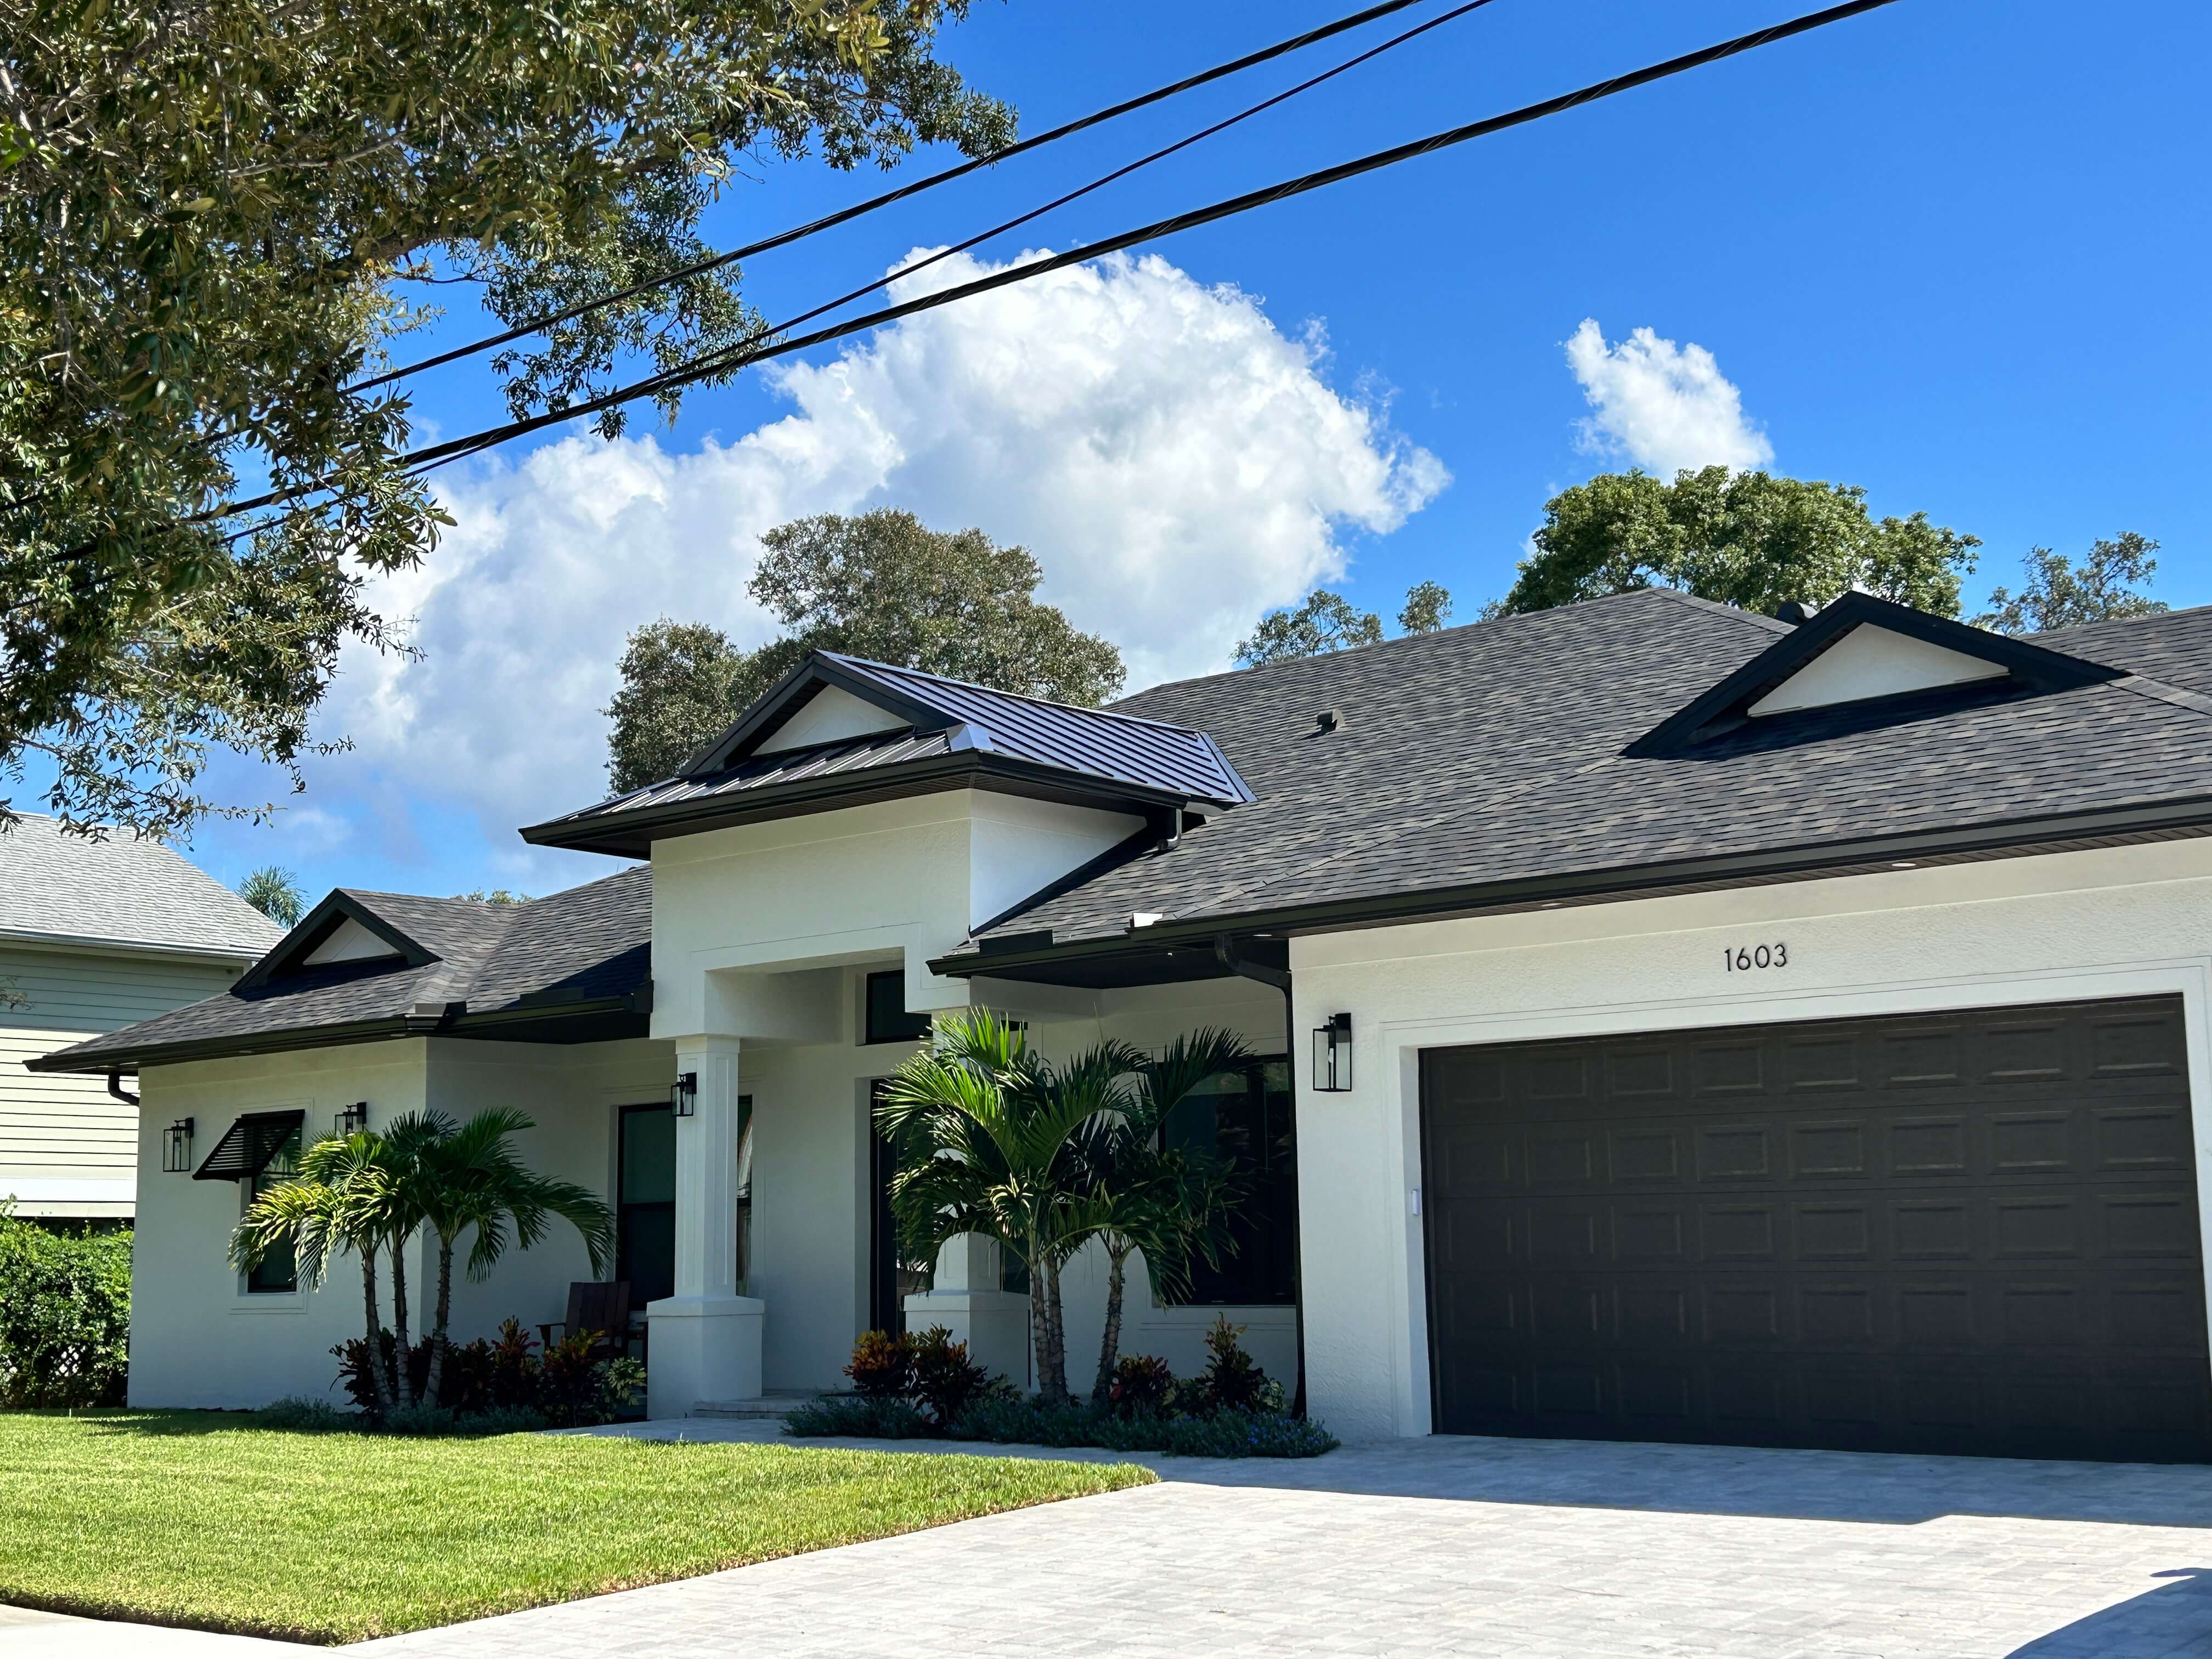 stucco home in Tampa Bay with dark shingle roof and a metal accent over front entrance